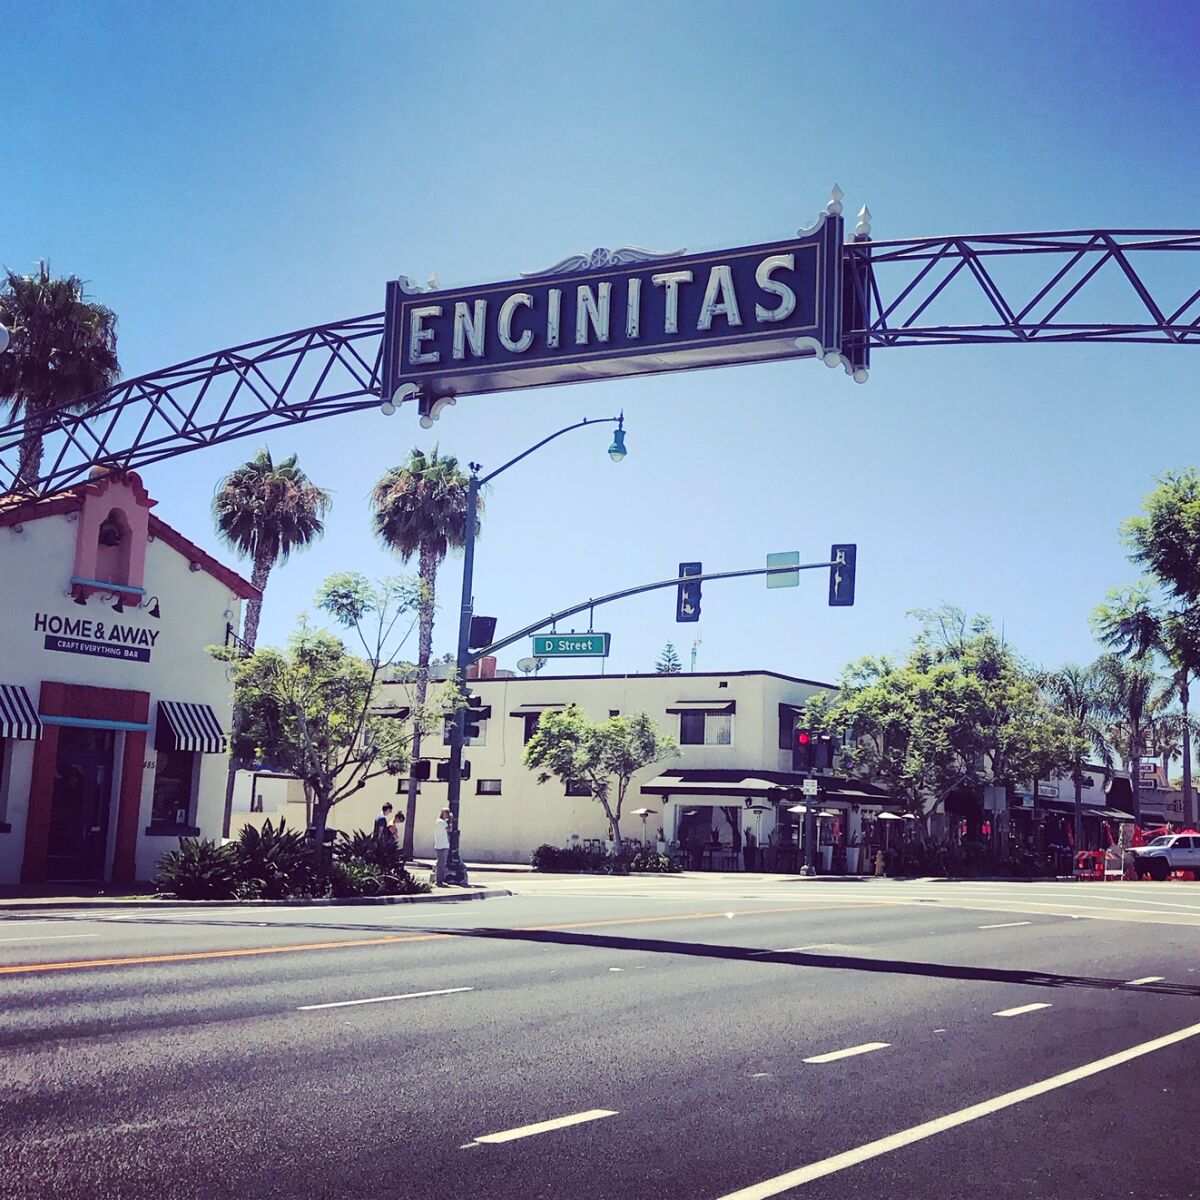 Part of the Encinitas downtown area.